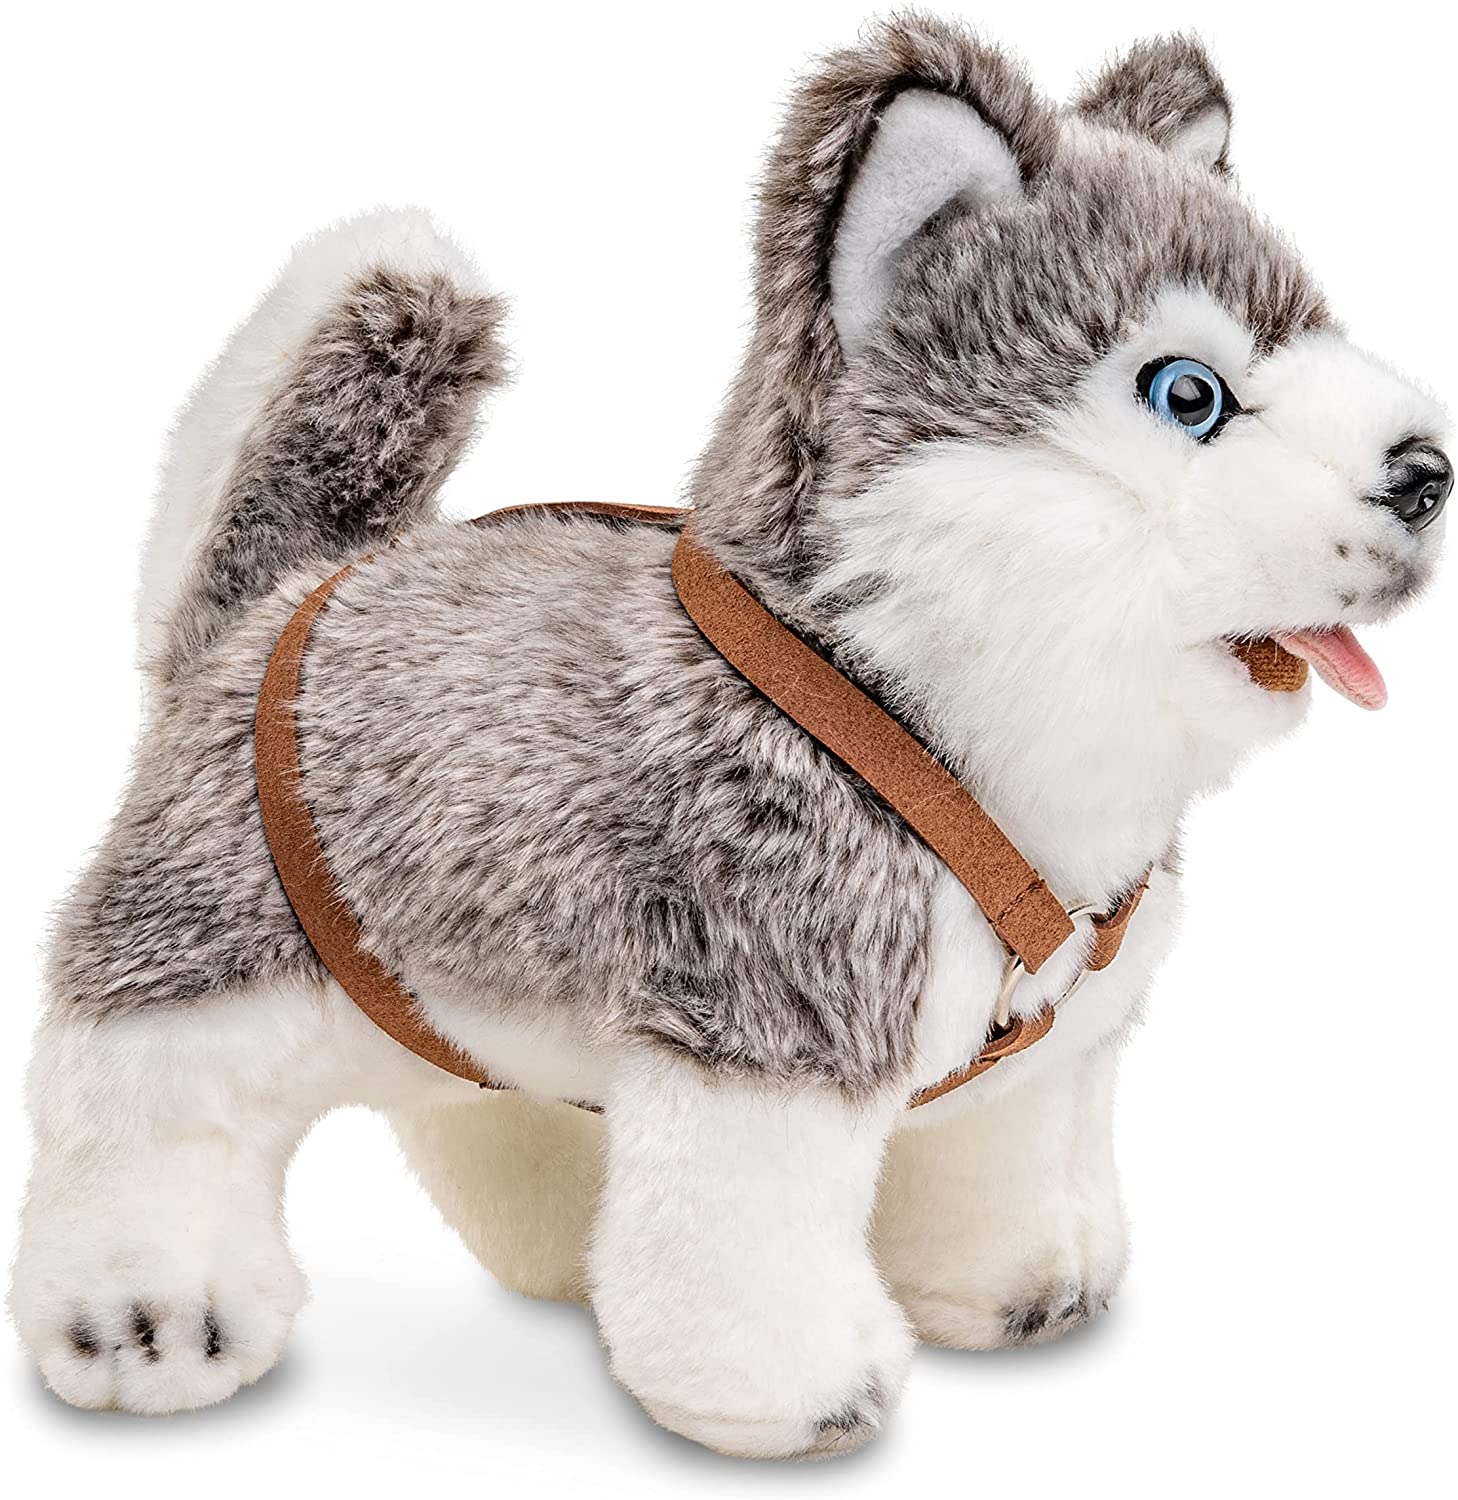 Husky puppy grey, with harness - standing - 24 cm (length)